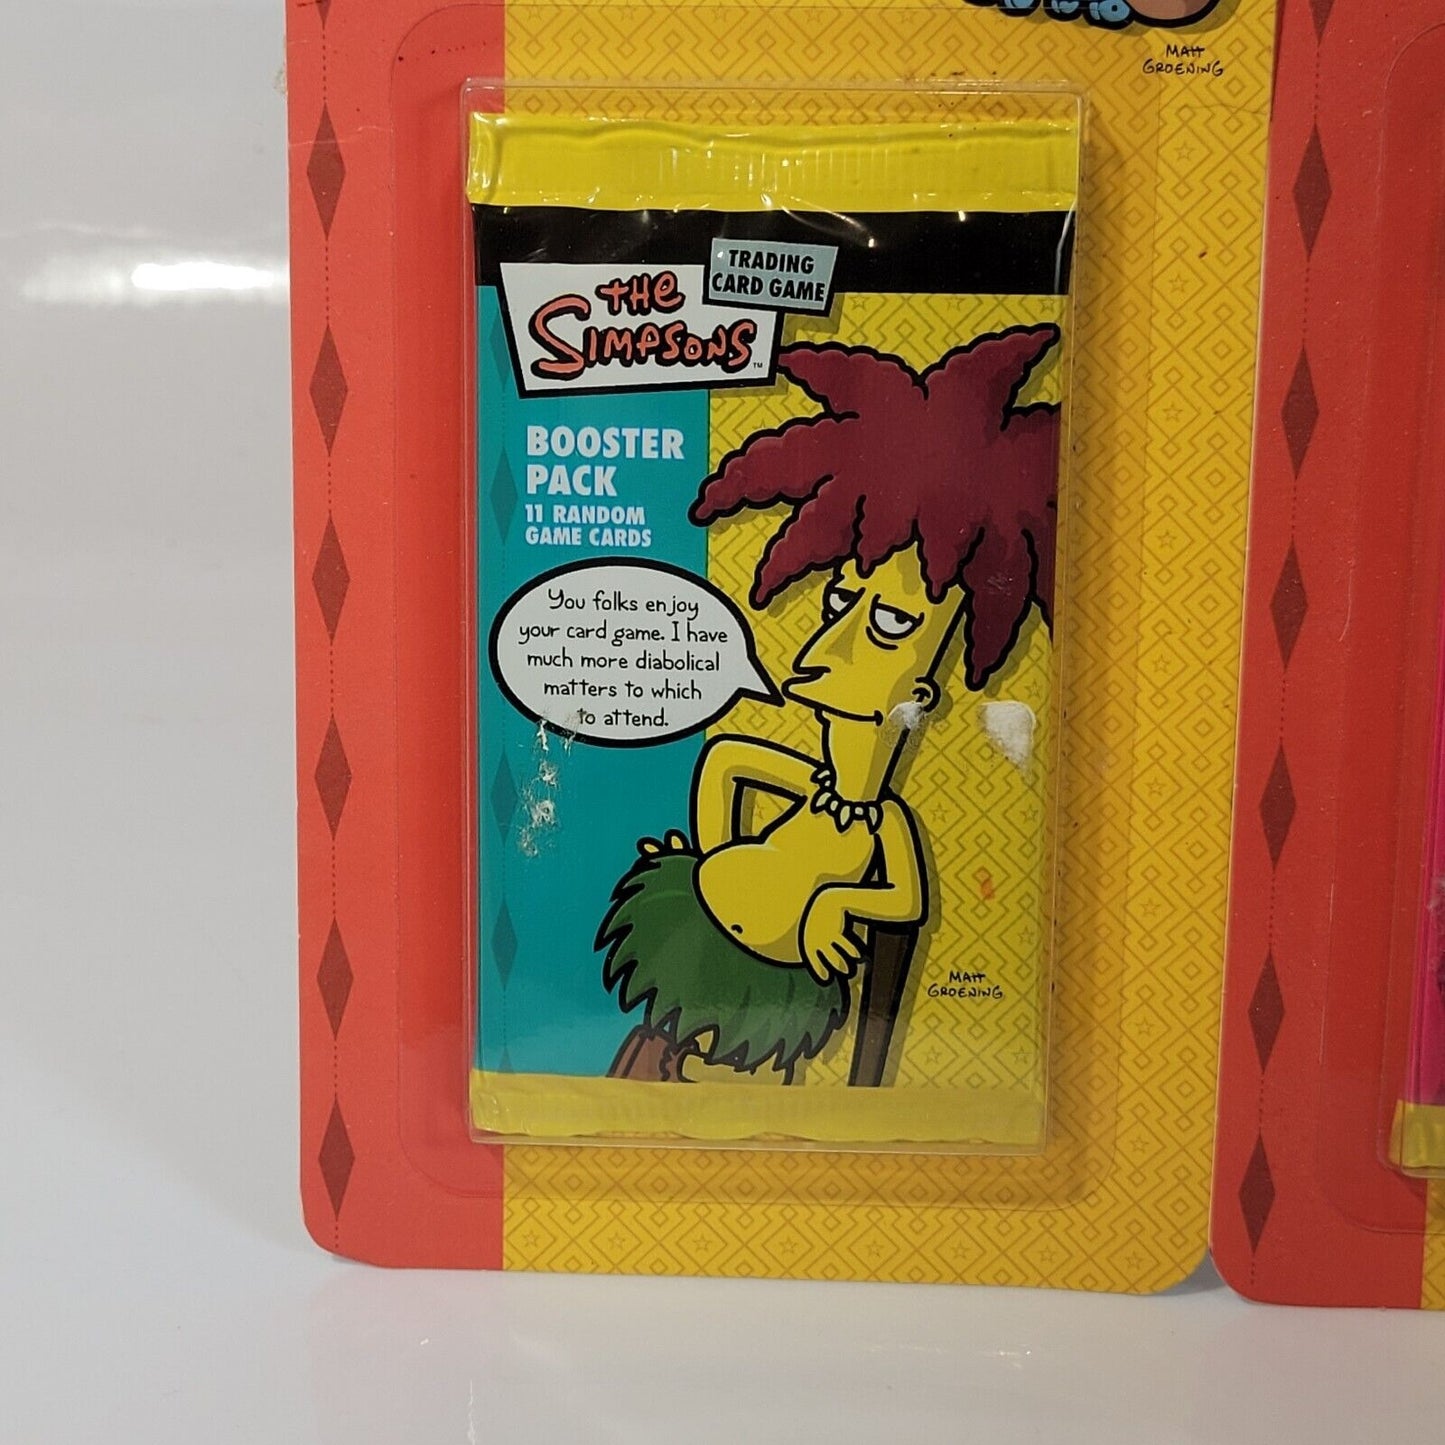 3 New Sealed 2003 The Simpsons Trading Card Game Booster Packs in Blister Packs